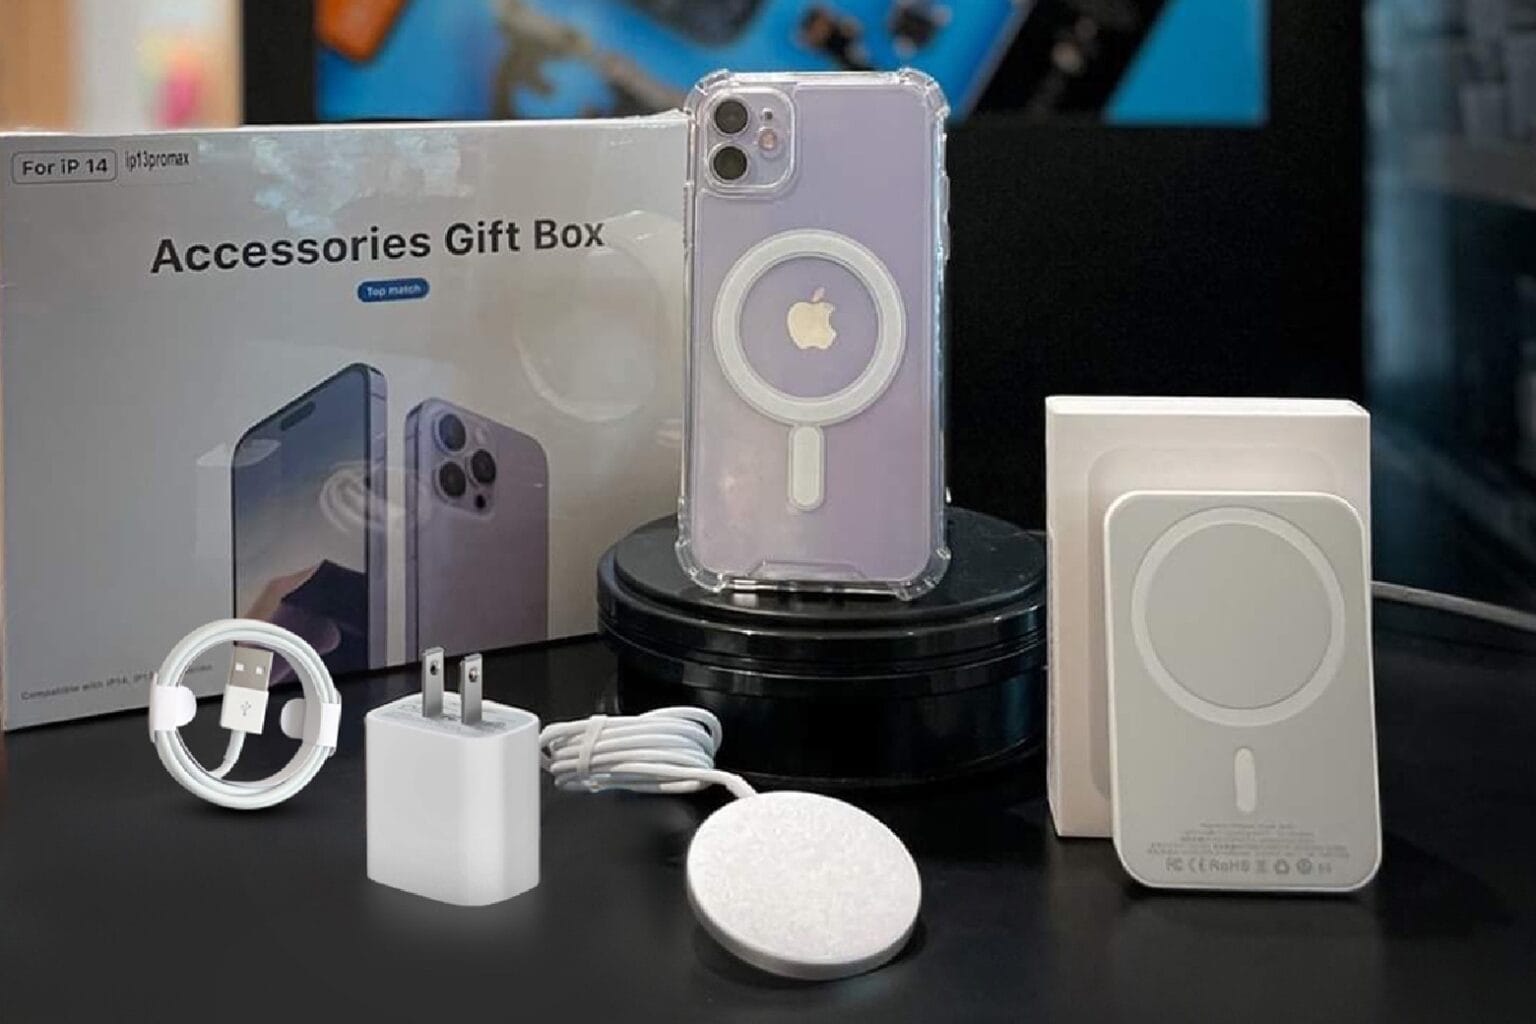 Charge in more ways with this iPhone accessory bundle, now only $49.99.